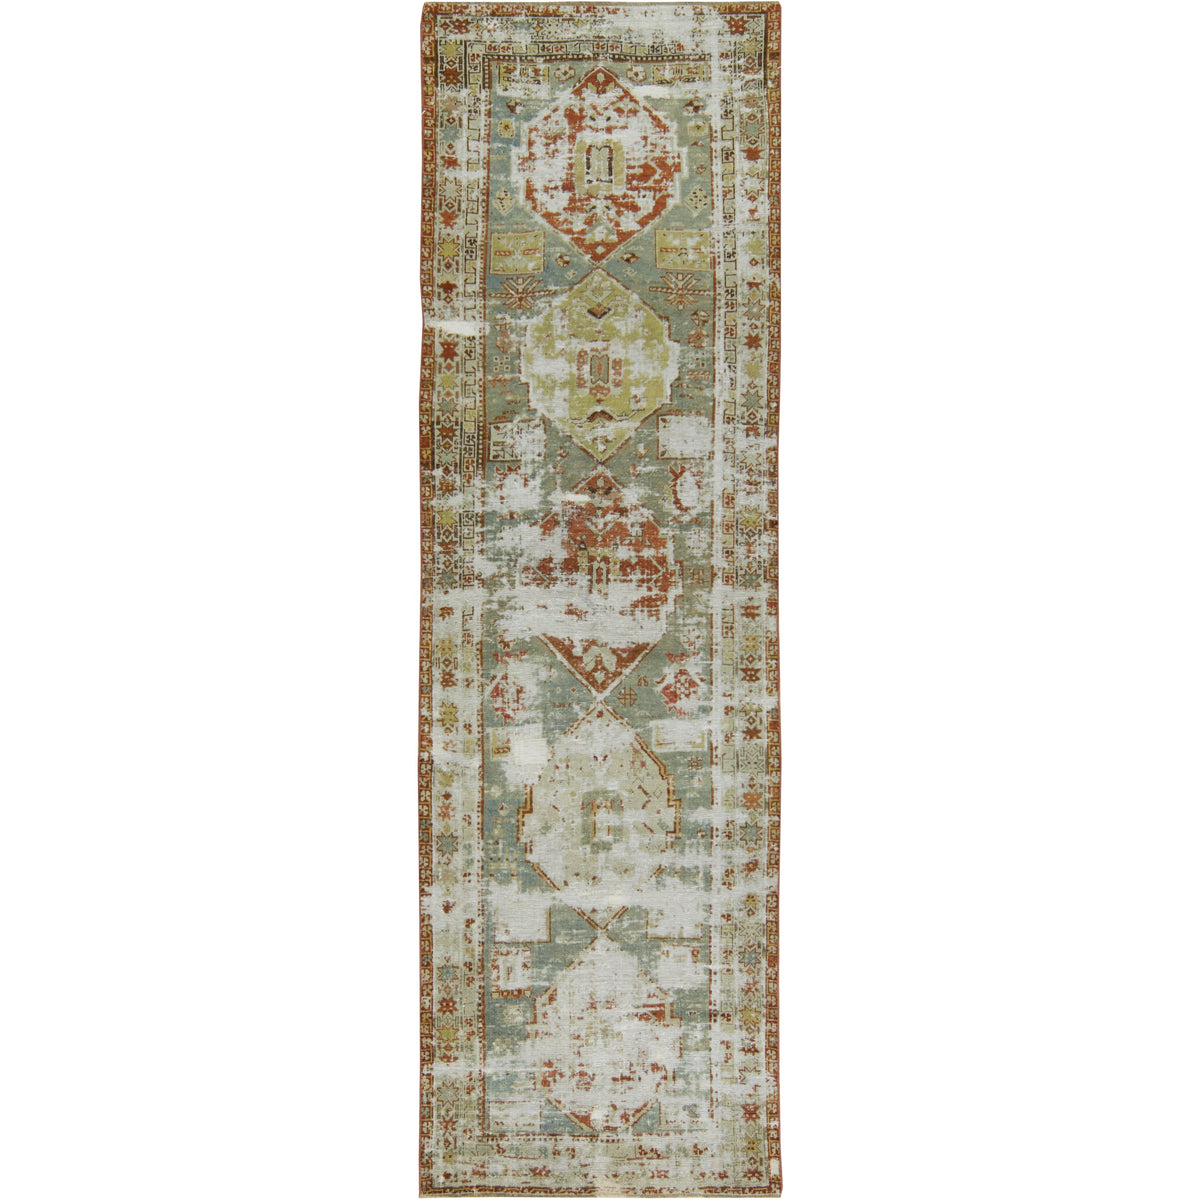 Ranell - The Heritage of Persian Weaves | Kuden Rugs